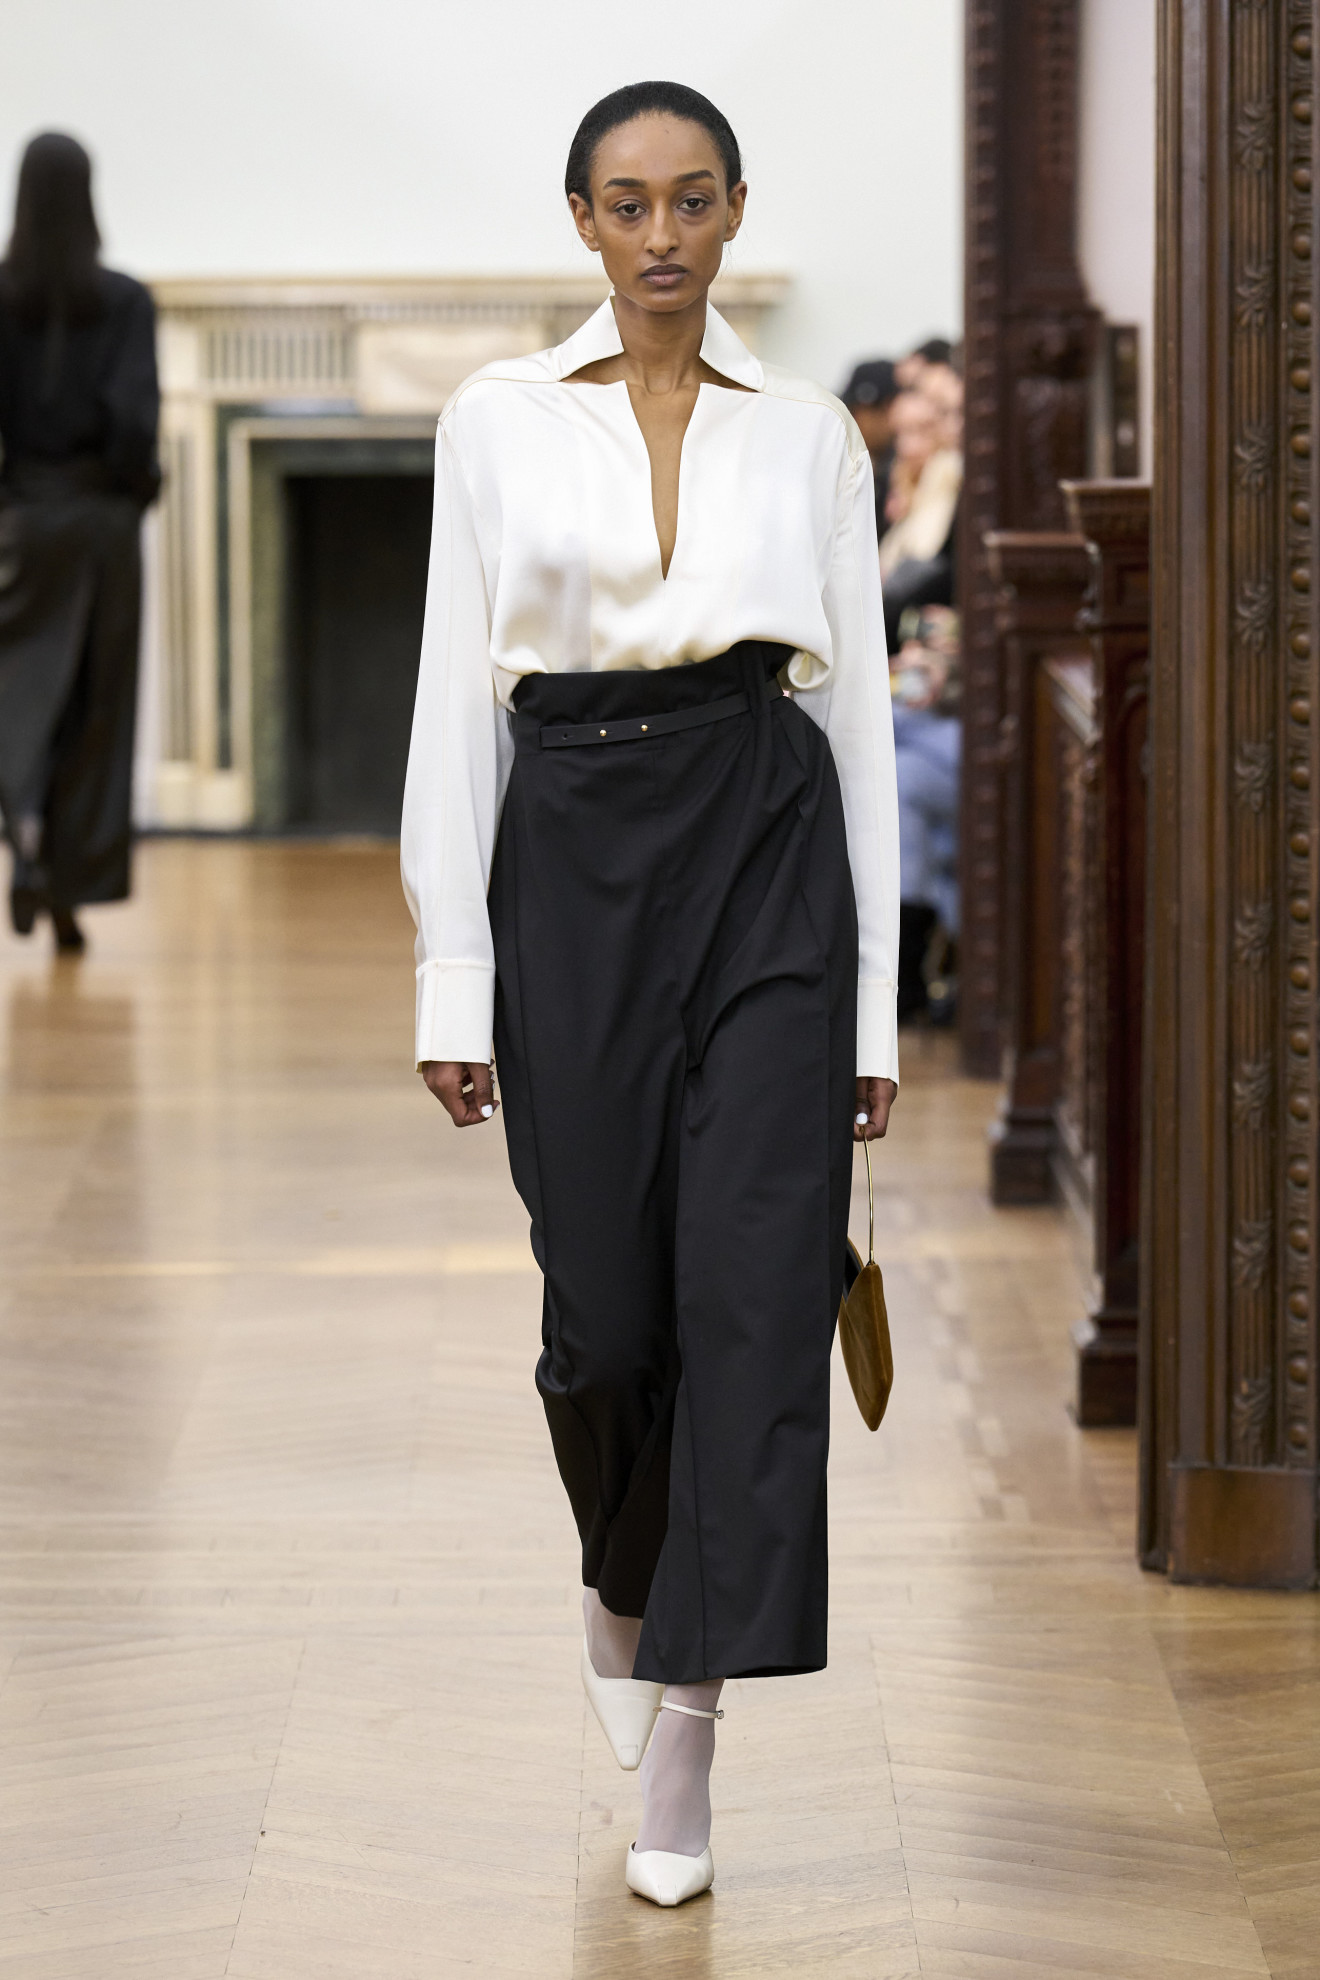 A Bevza model wearing a white blouse and black skirt with white tights and shoes at the F/W 24 show.